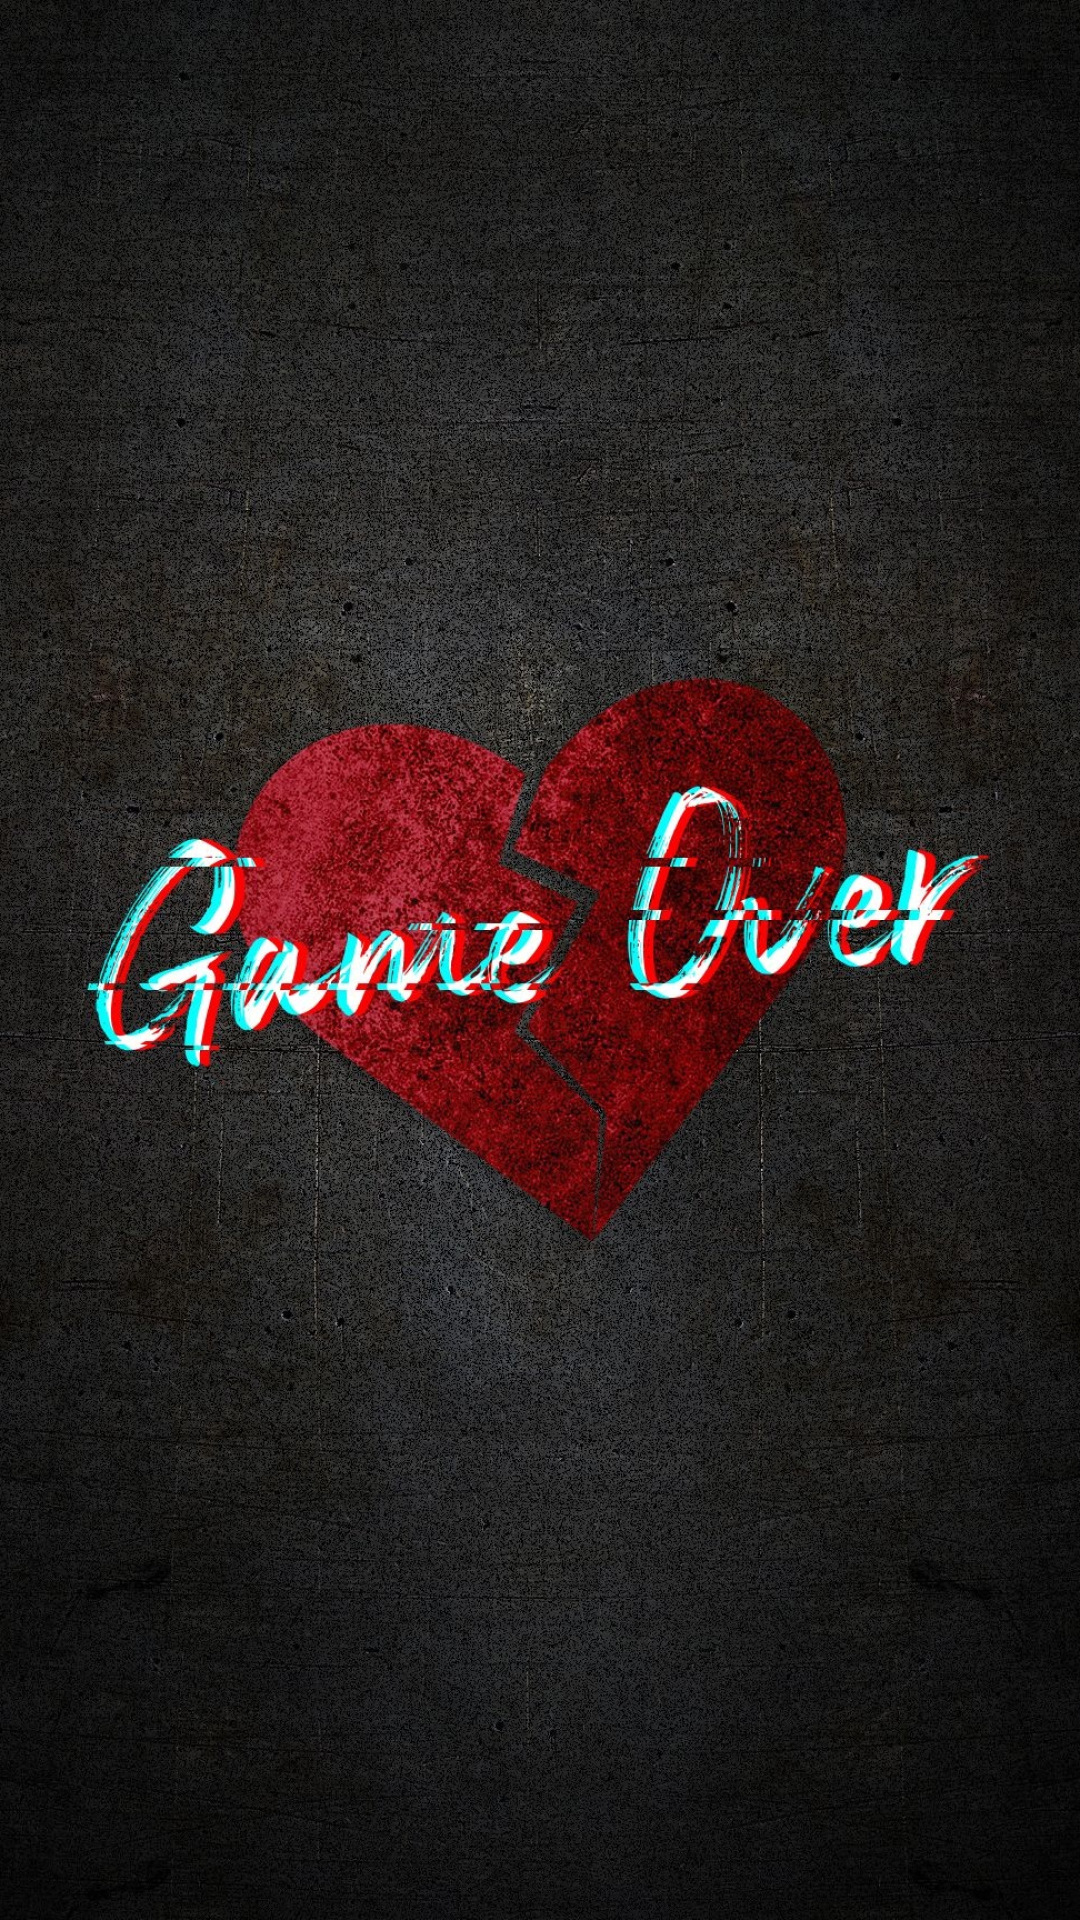 Game Over, Cute love wallpapers, Phone backgrounds, Broken heart, 1080x1920 Full HD Phone